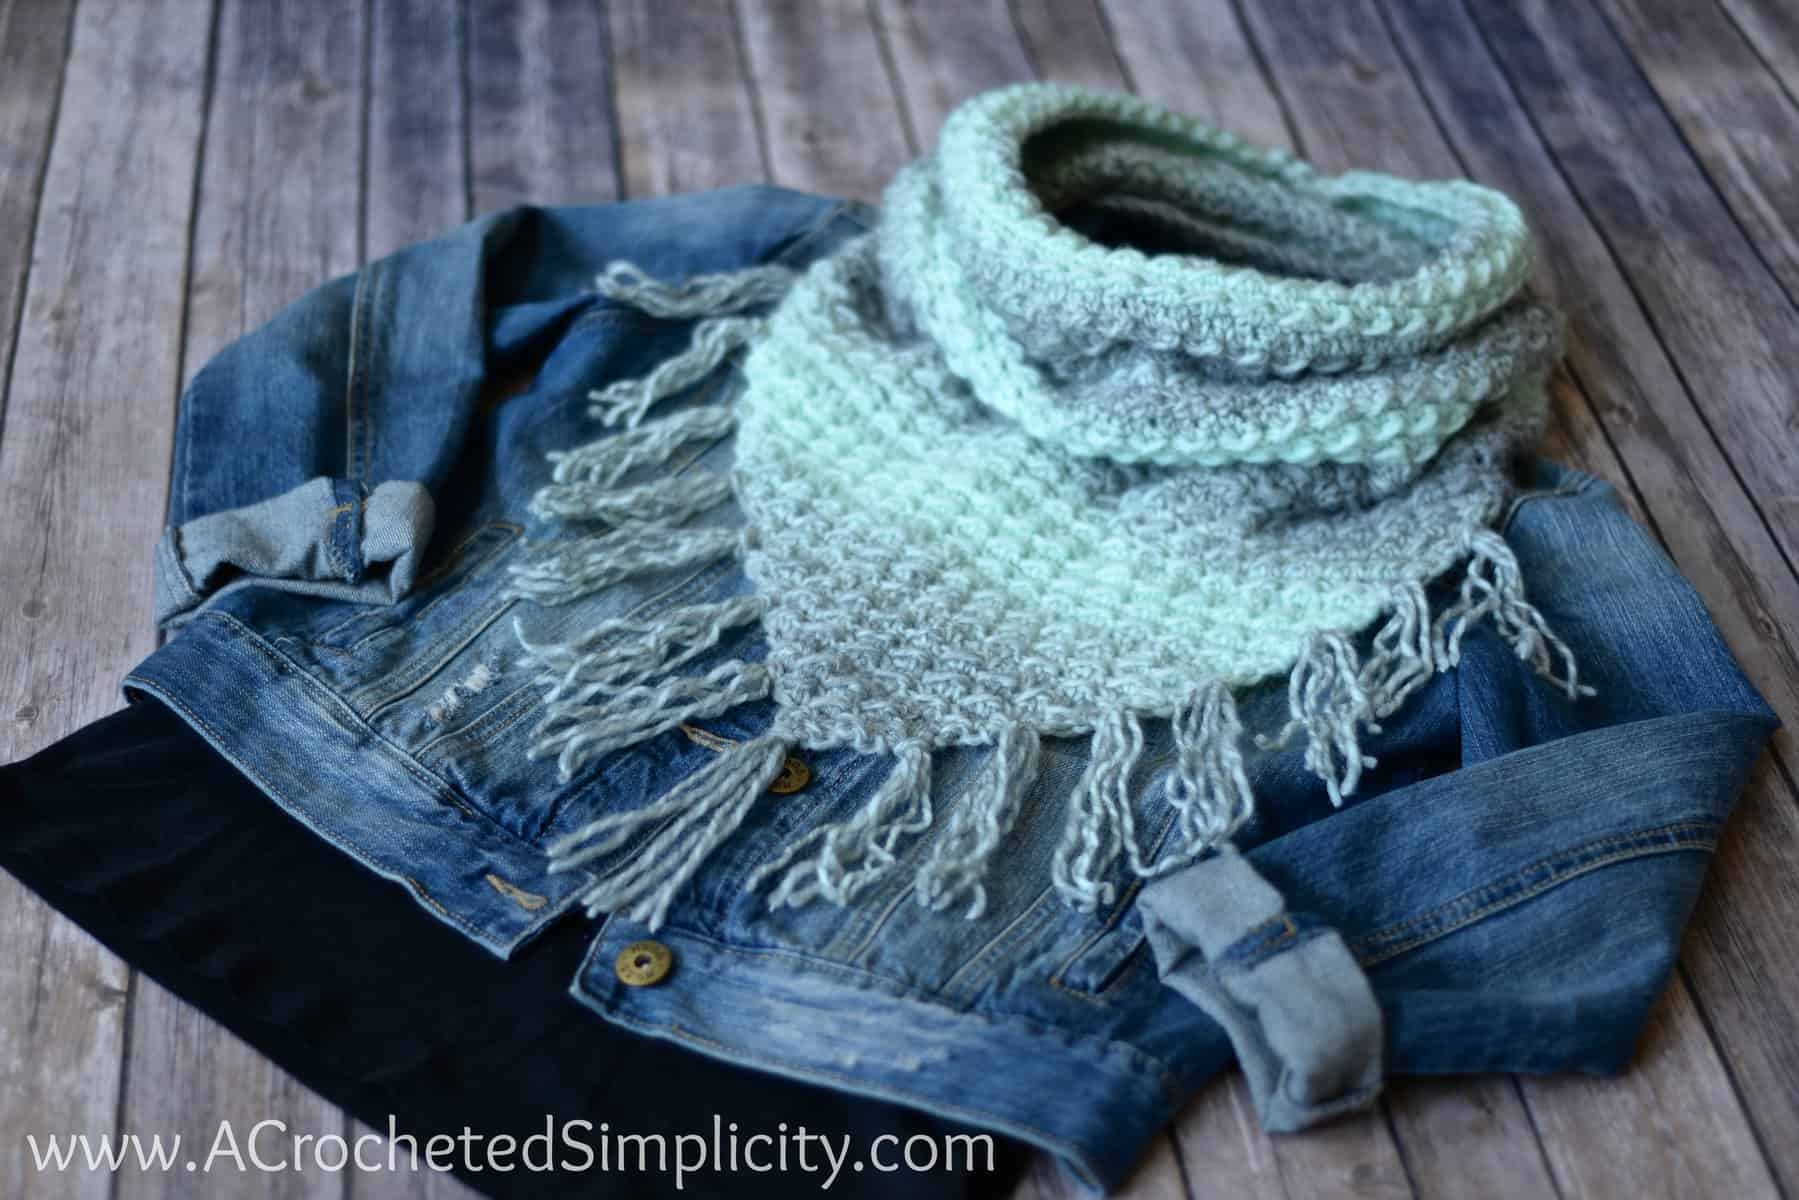 25 Easy Crochet Projects for Lion Brand Scarfie Yarn - love. life. yarn.